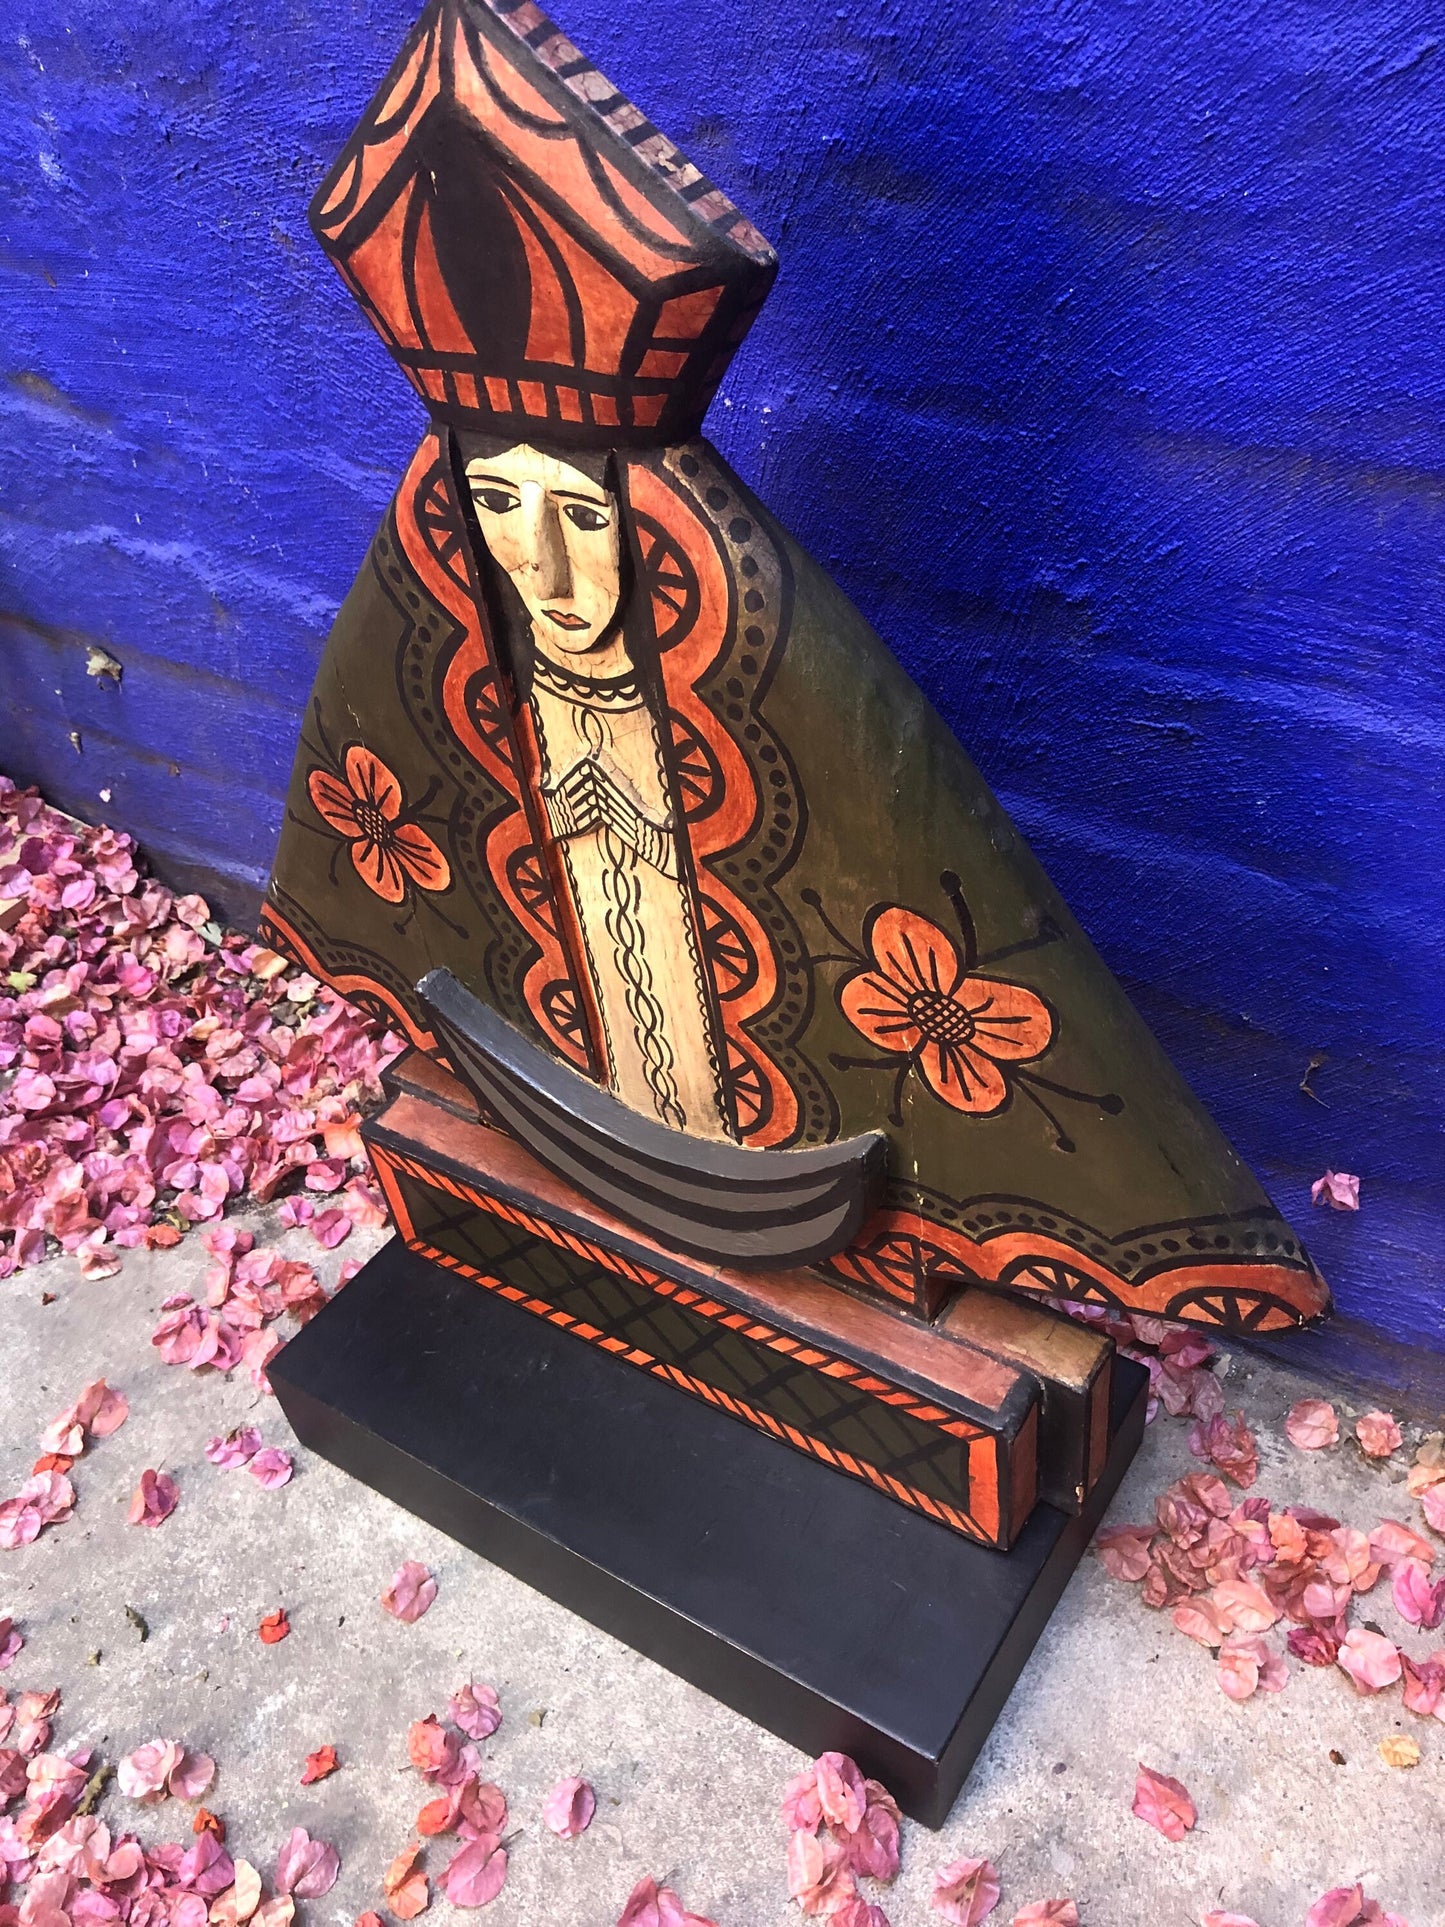 Religious Madonna Figure on Wood Stand